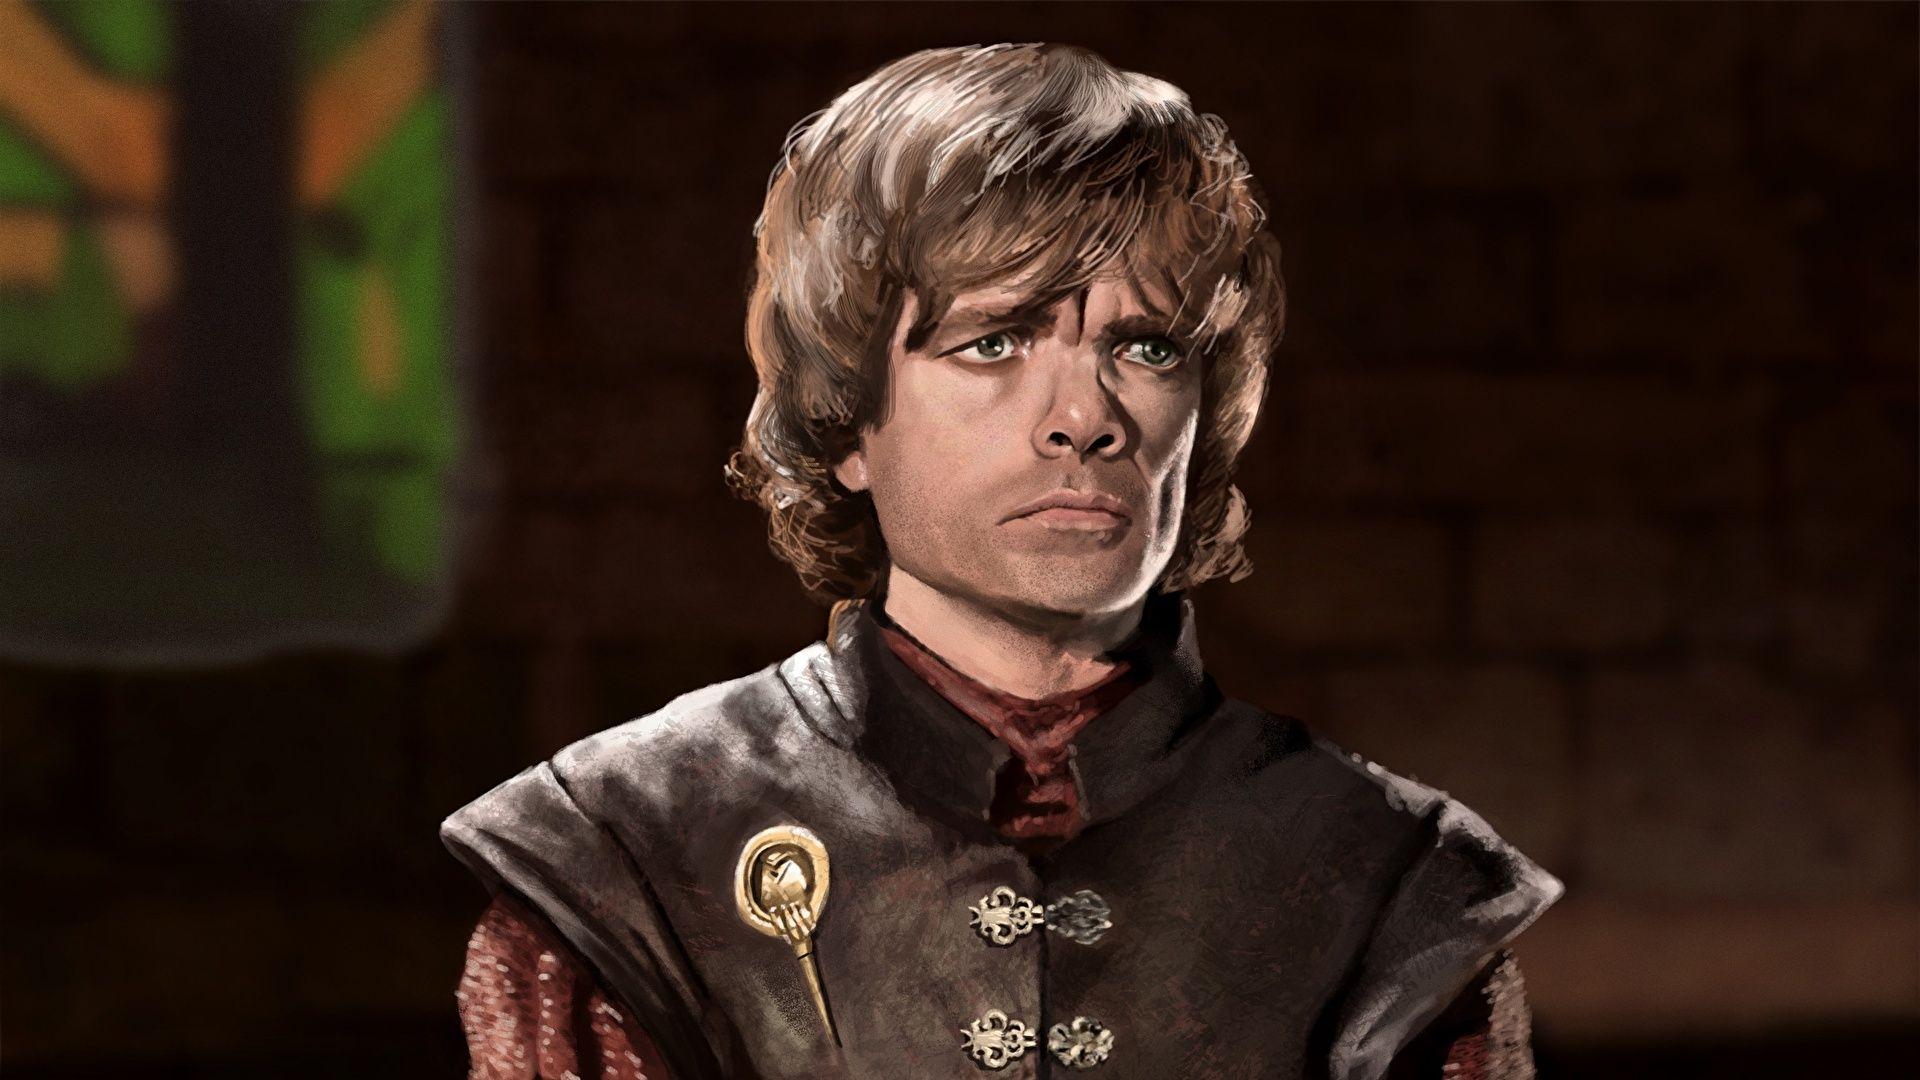 Photo Game of Thrones Peter Dinklage Men Tyrion Lannister 1920x1080